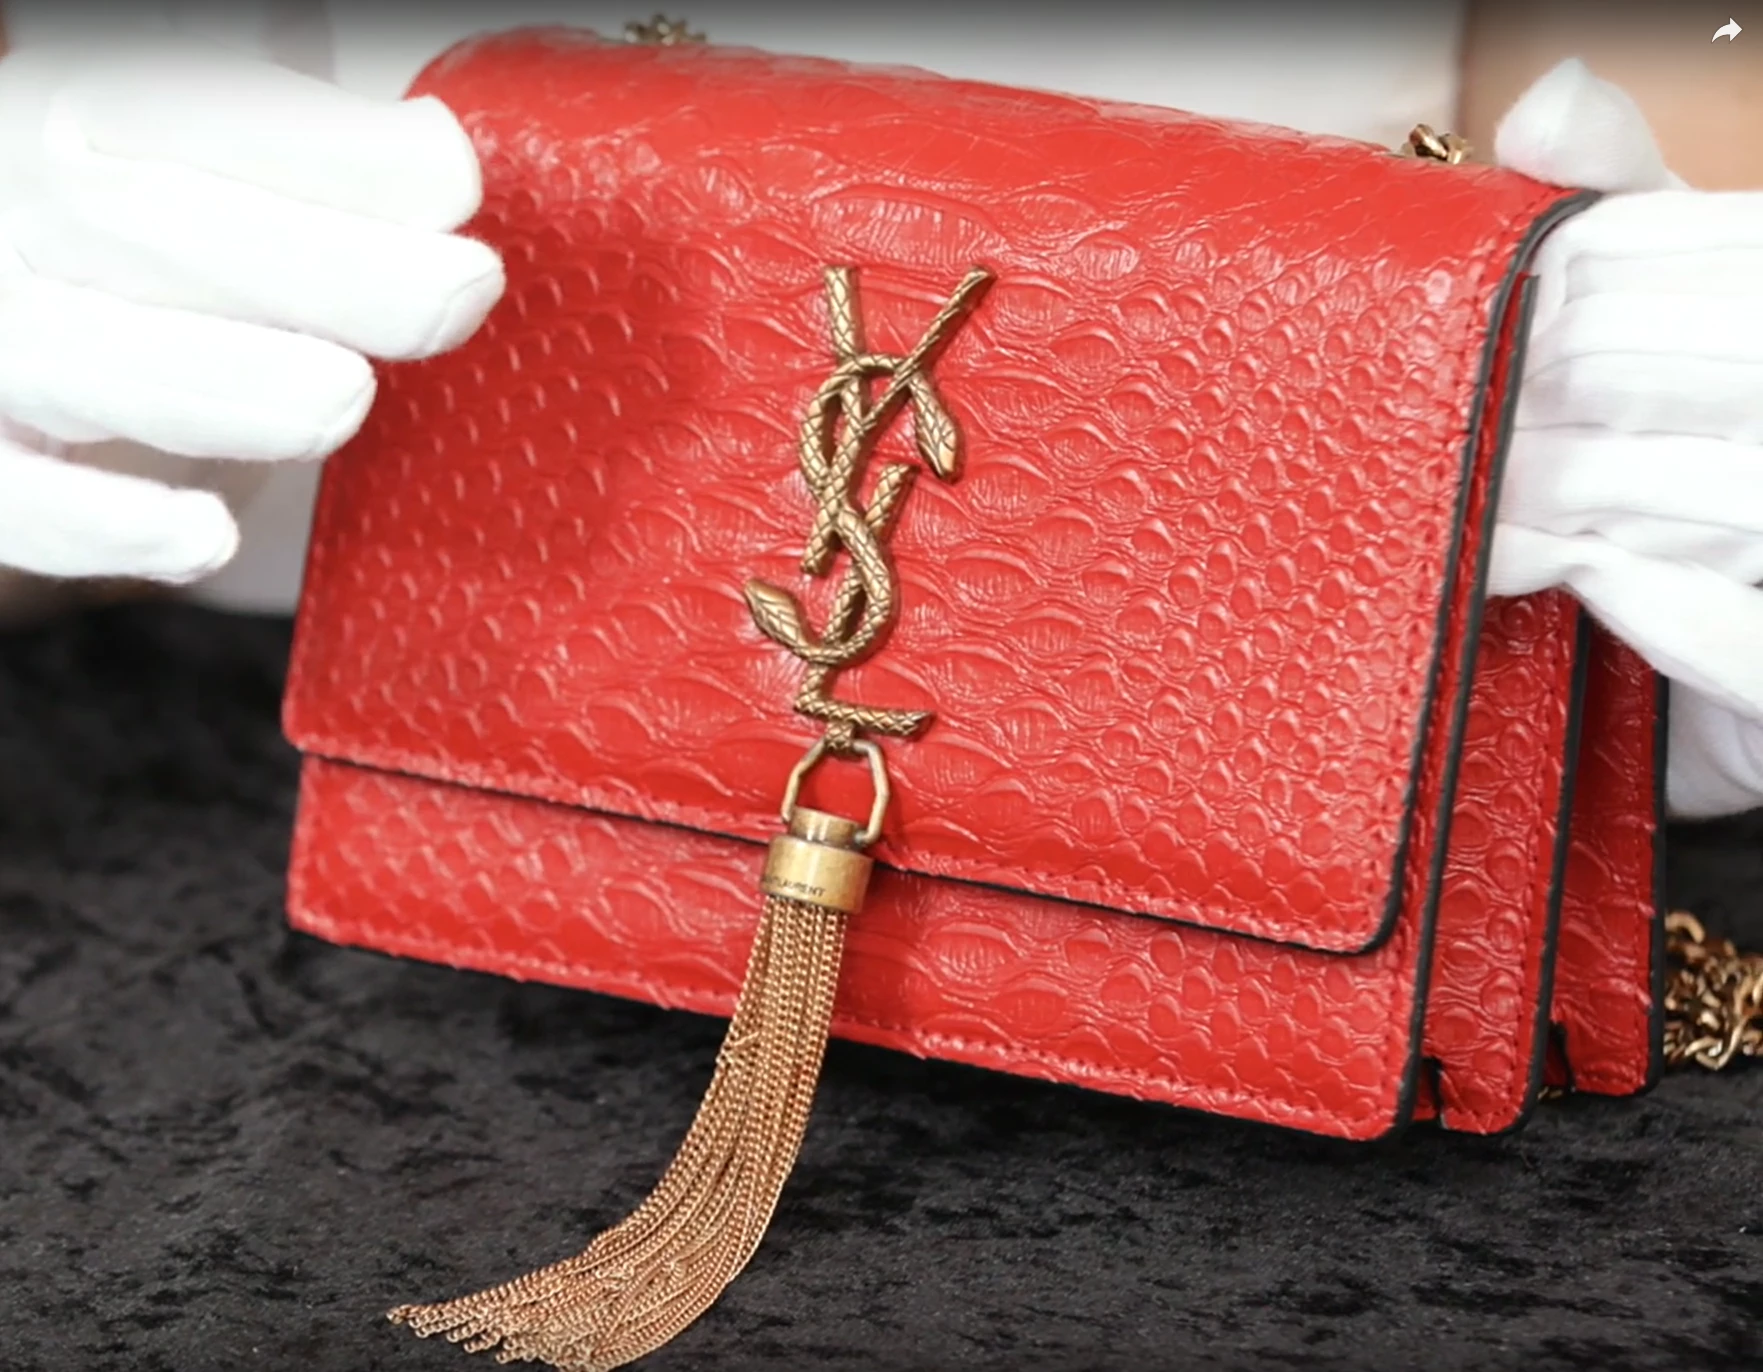 Spotting the Difference Between Authentic and Fake Yves Saint Laurent Bags